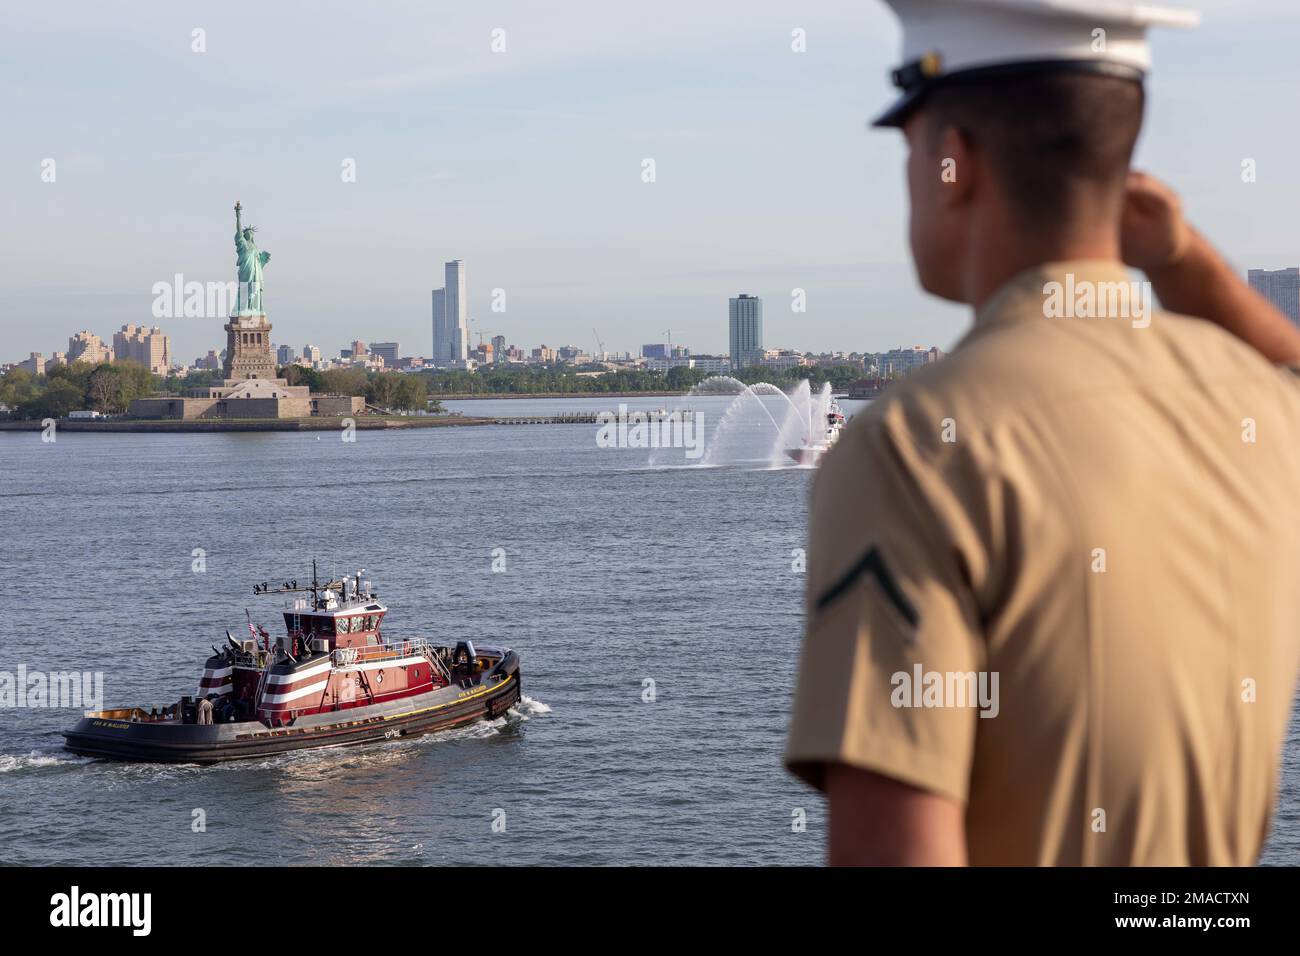 220525-N-HA192-1221  New York (May 25, 2022) - Marines assigned to Marine Expeditionary Unit 24 and Sailors assigned to amphibious assault ship USS Bataan (LHD 5), man the rails while Bataan arrives to Fleet Week New York May 25, 2022.  Bataan is underway in the 2nd fleet area of operations. Bataan is homeported at Naval Station Norfolk. Stock Photo